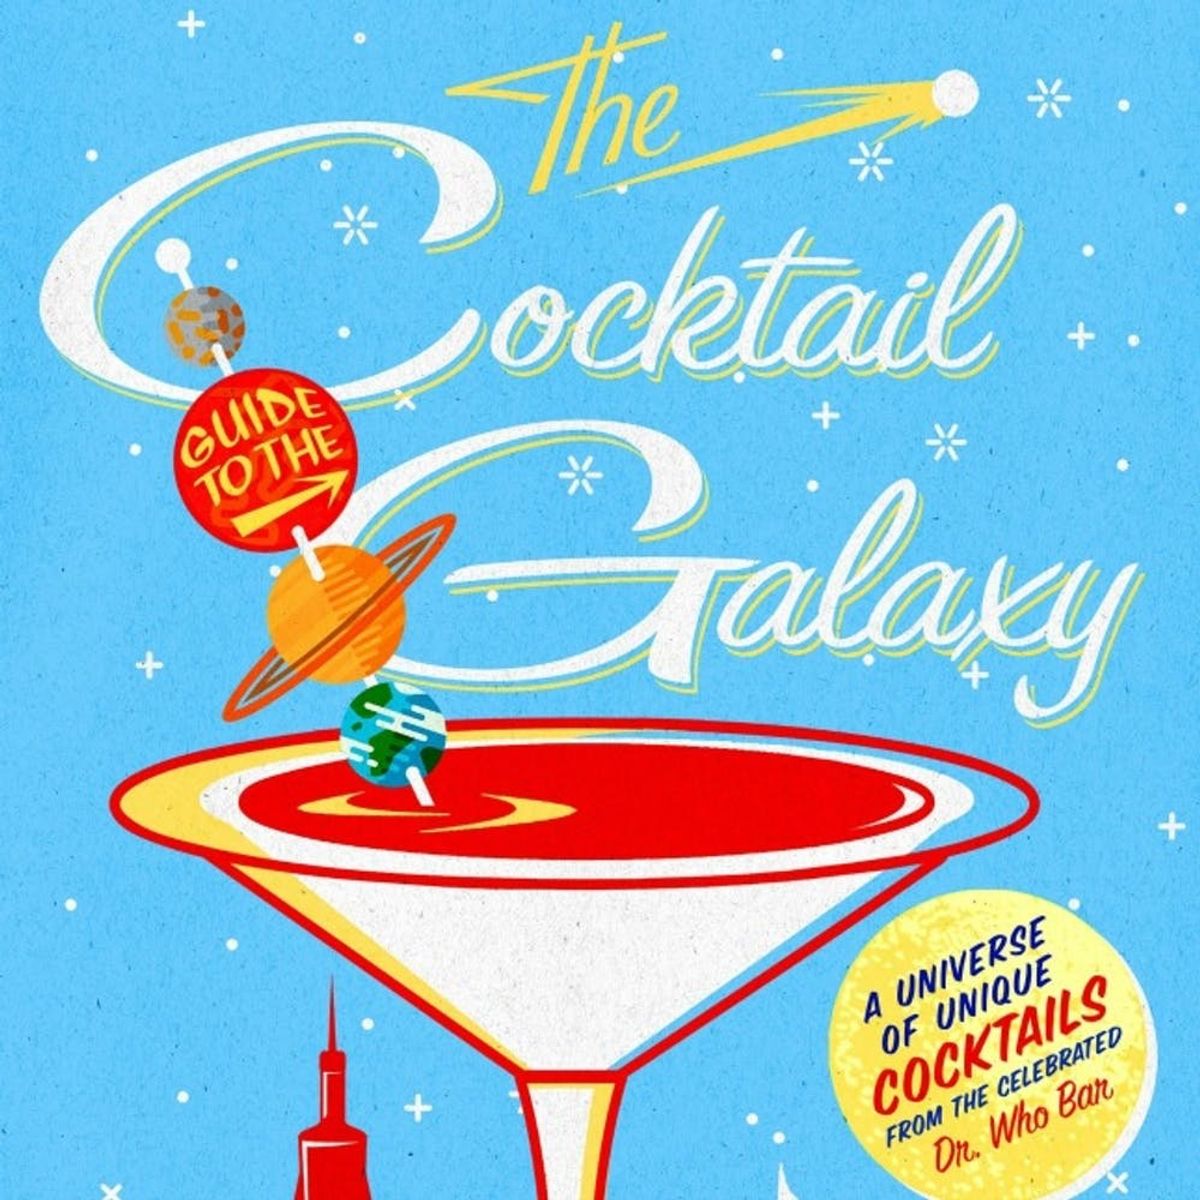 The Cocktail Guide to the Galaxy Brings Your Fave Fandoms to Your Bar